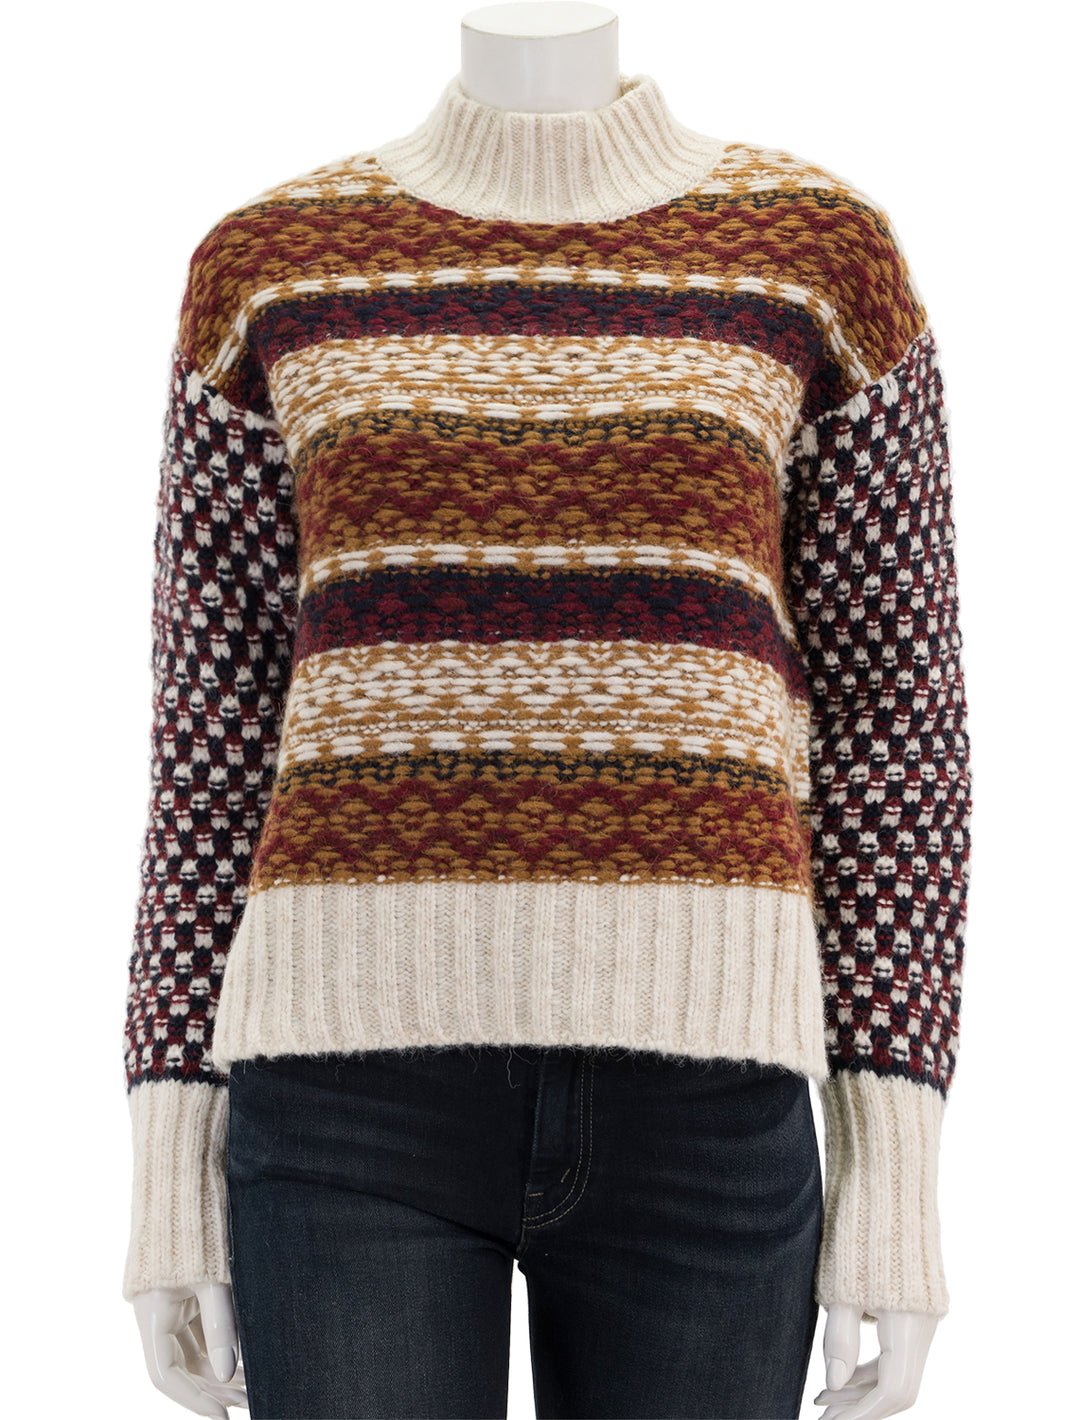 Front view of Veronica Beard's clary sweater.